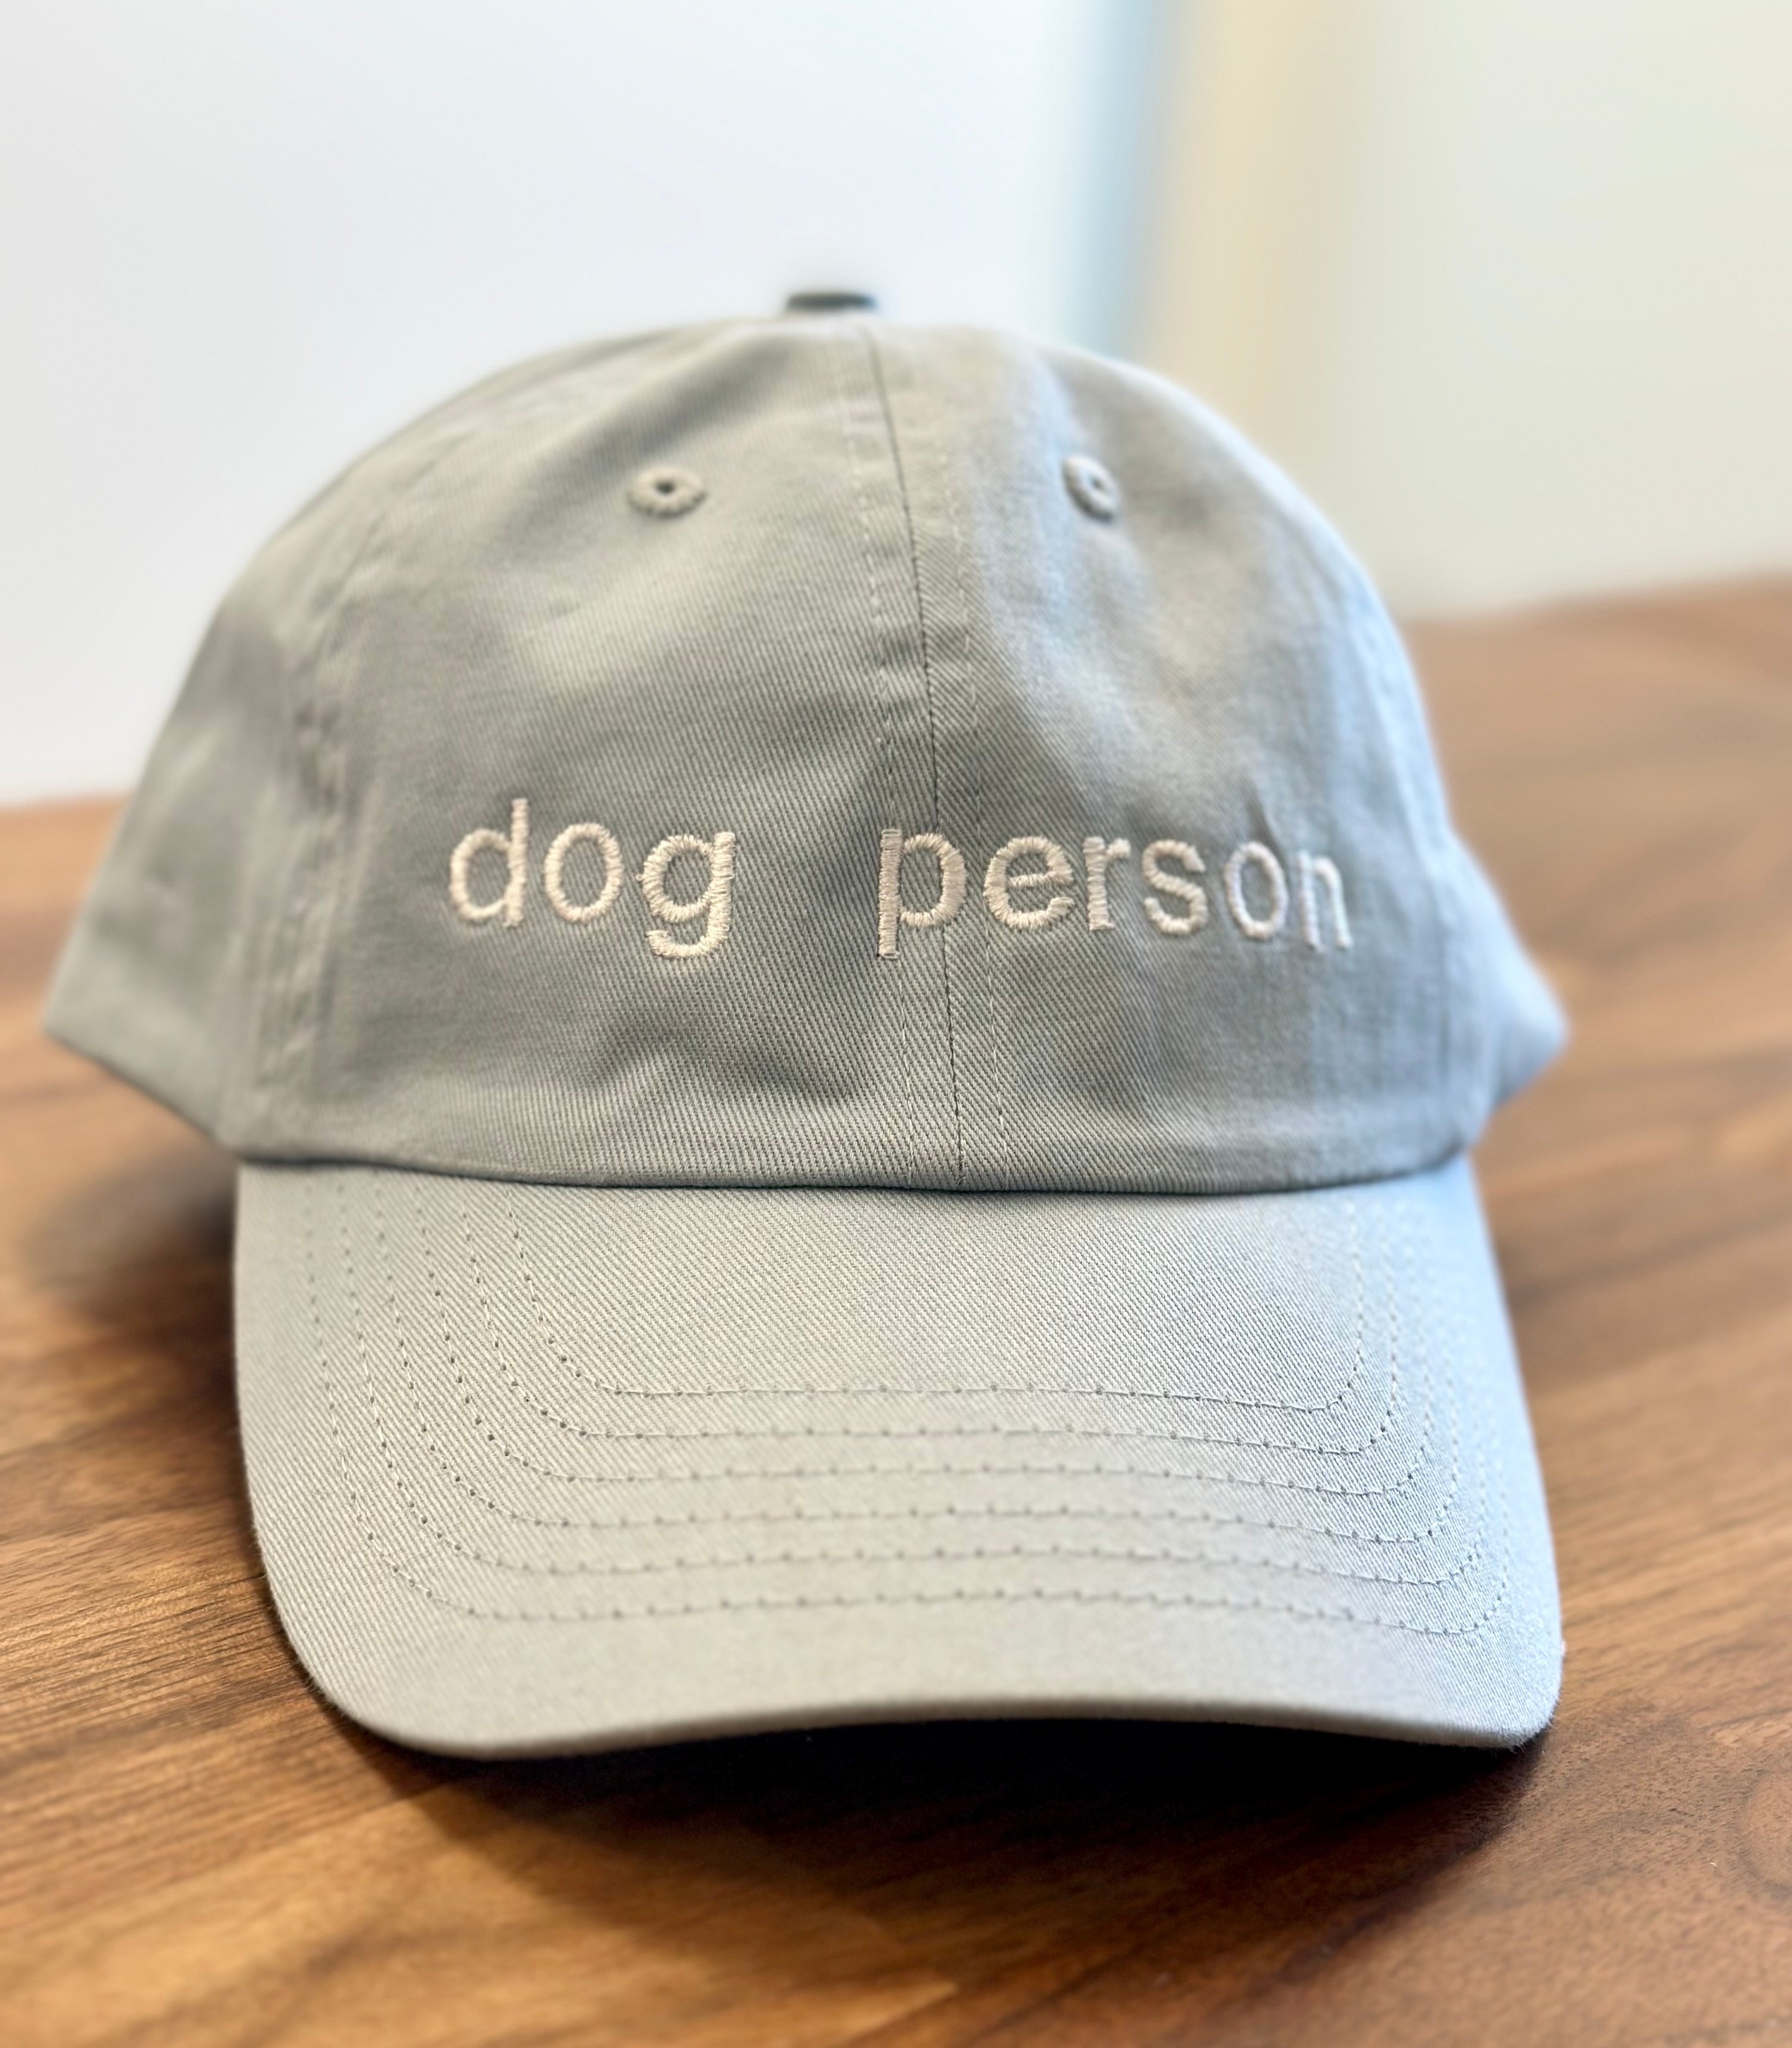 ‘Dog Person’ Hat